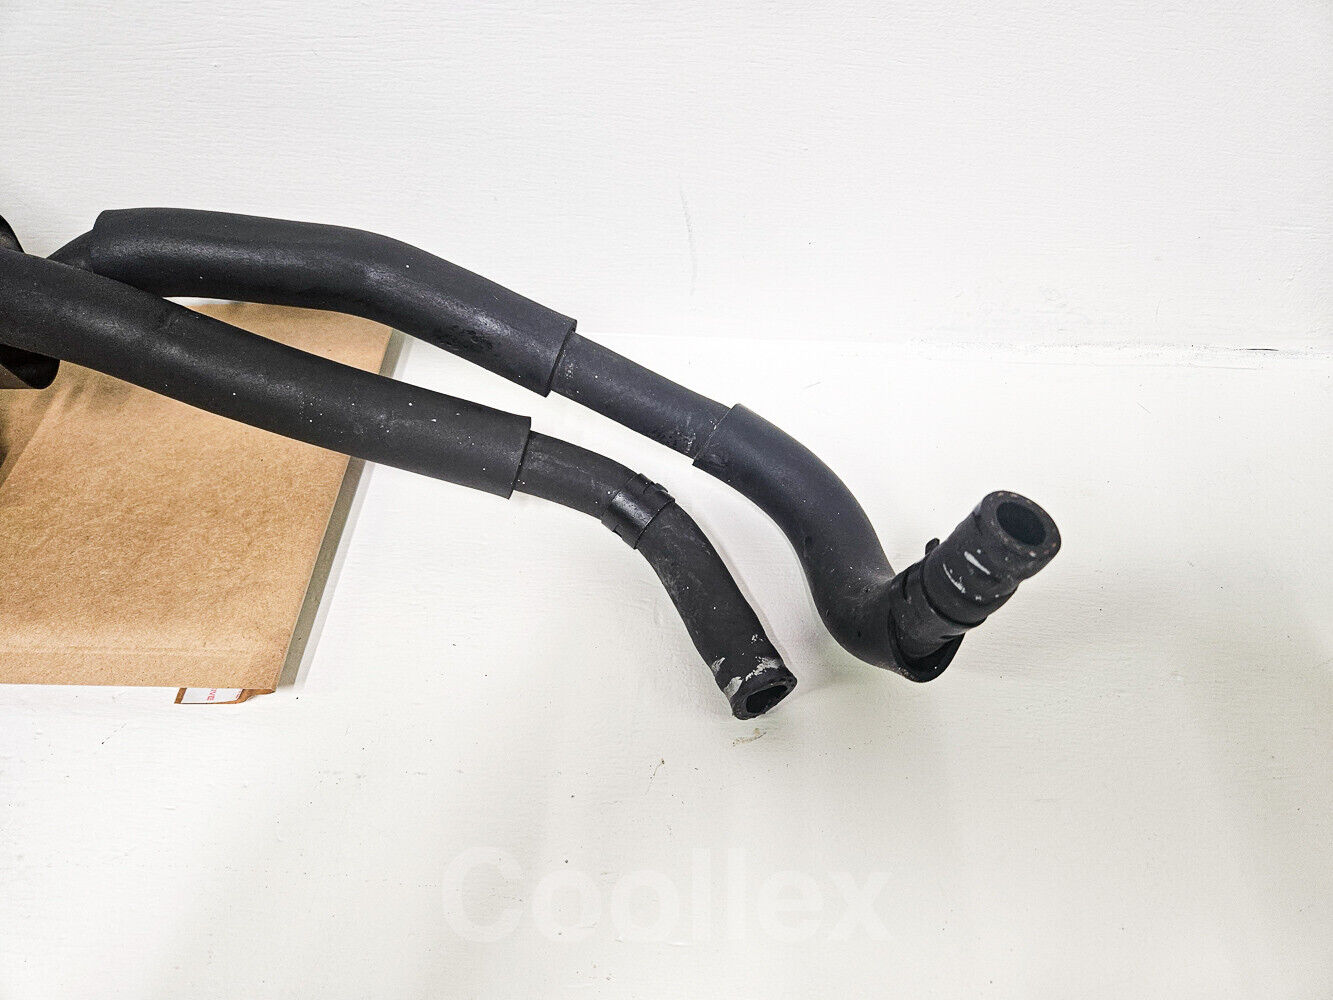 06-11 Lexus Is250 Awd Transmission Oil Cooler with Hose 33493-30020 Oem